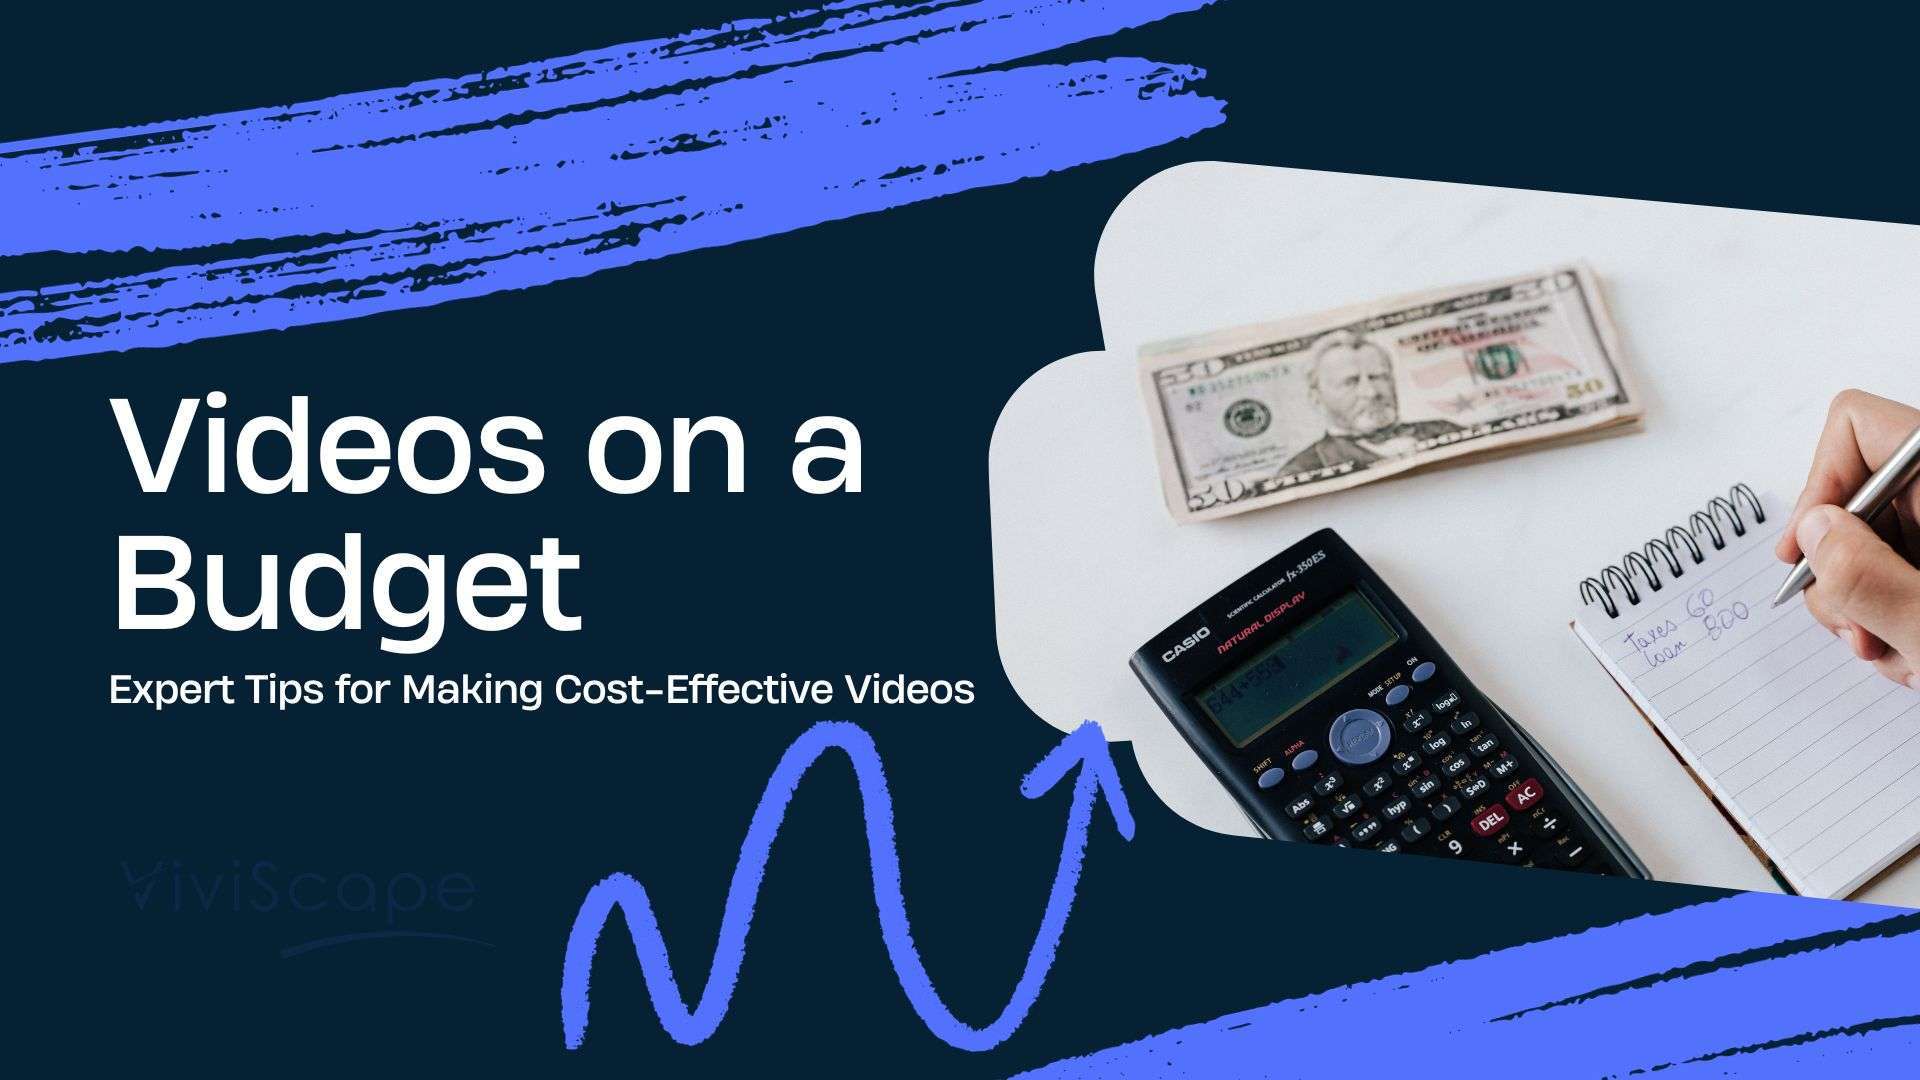 Video content on a budget